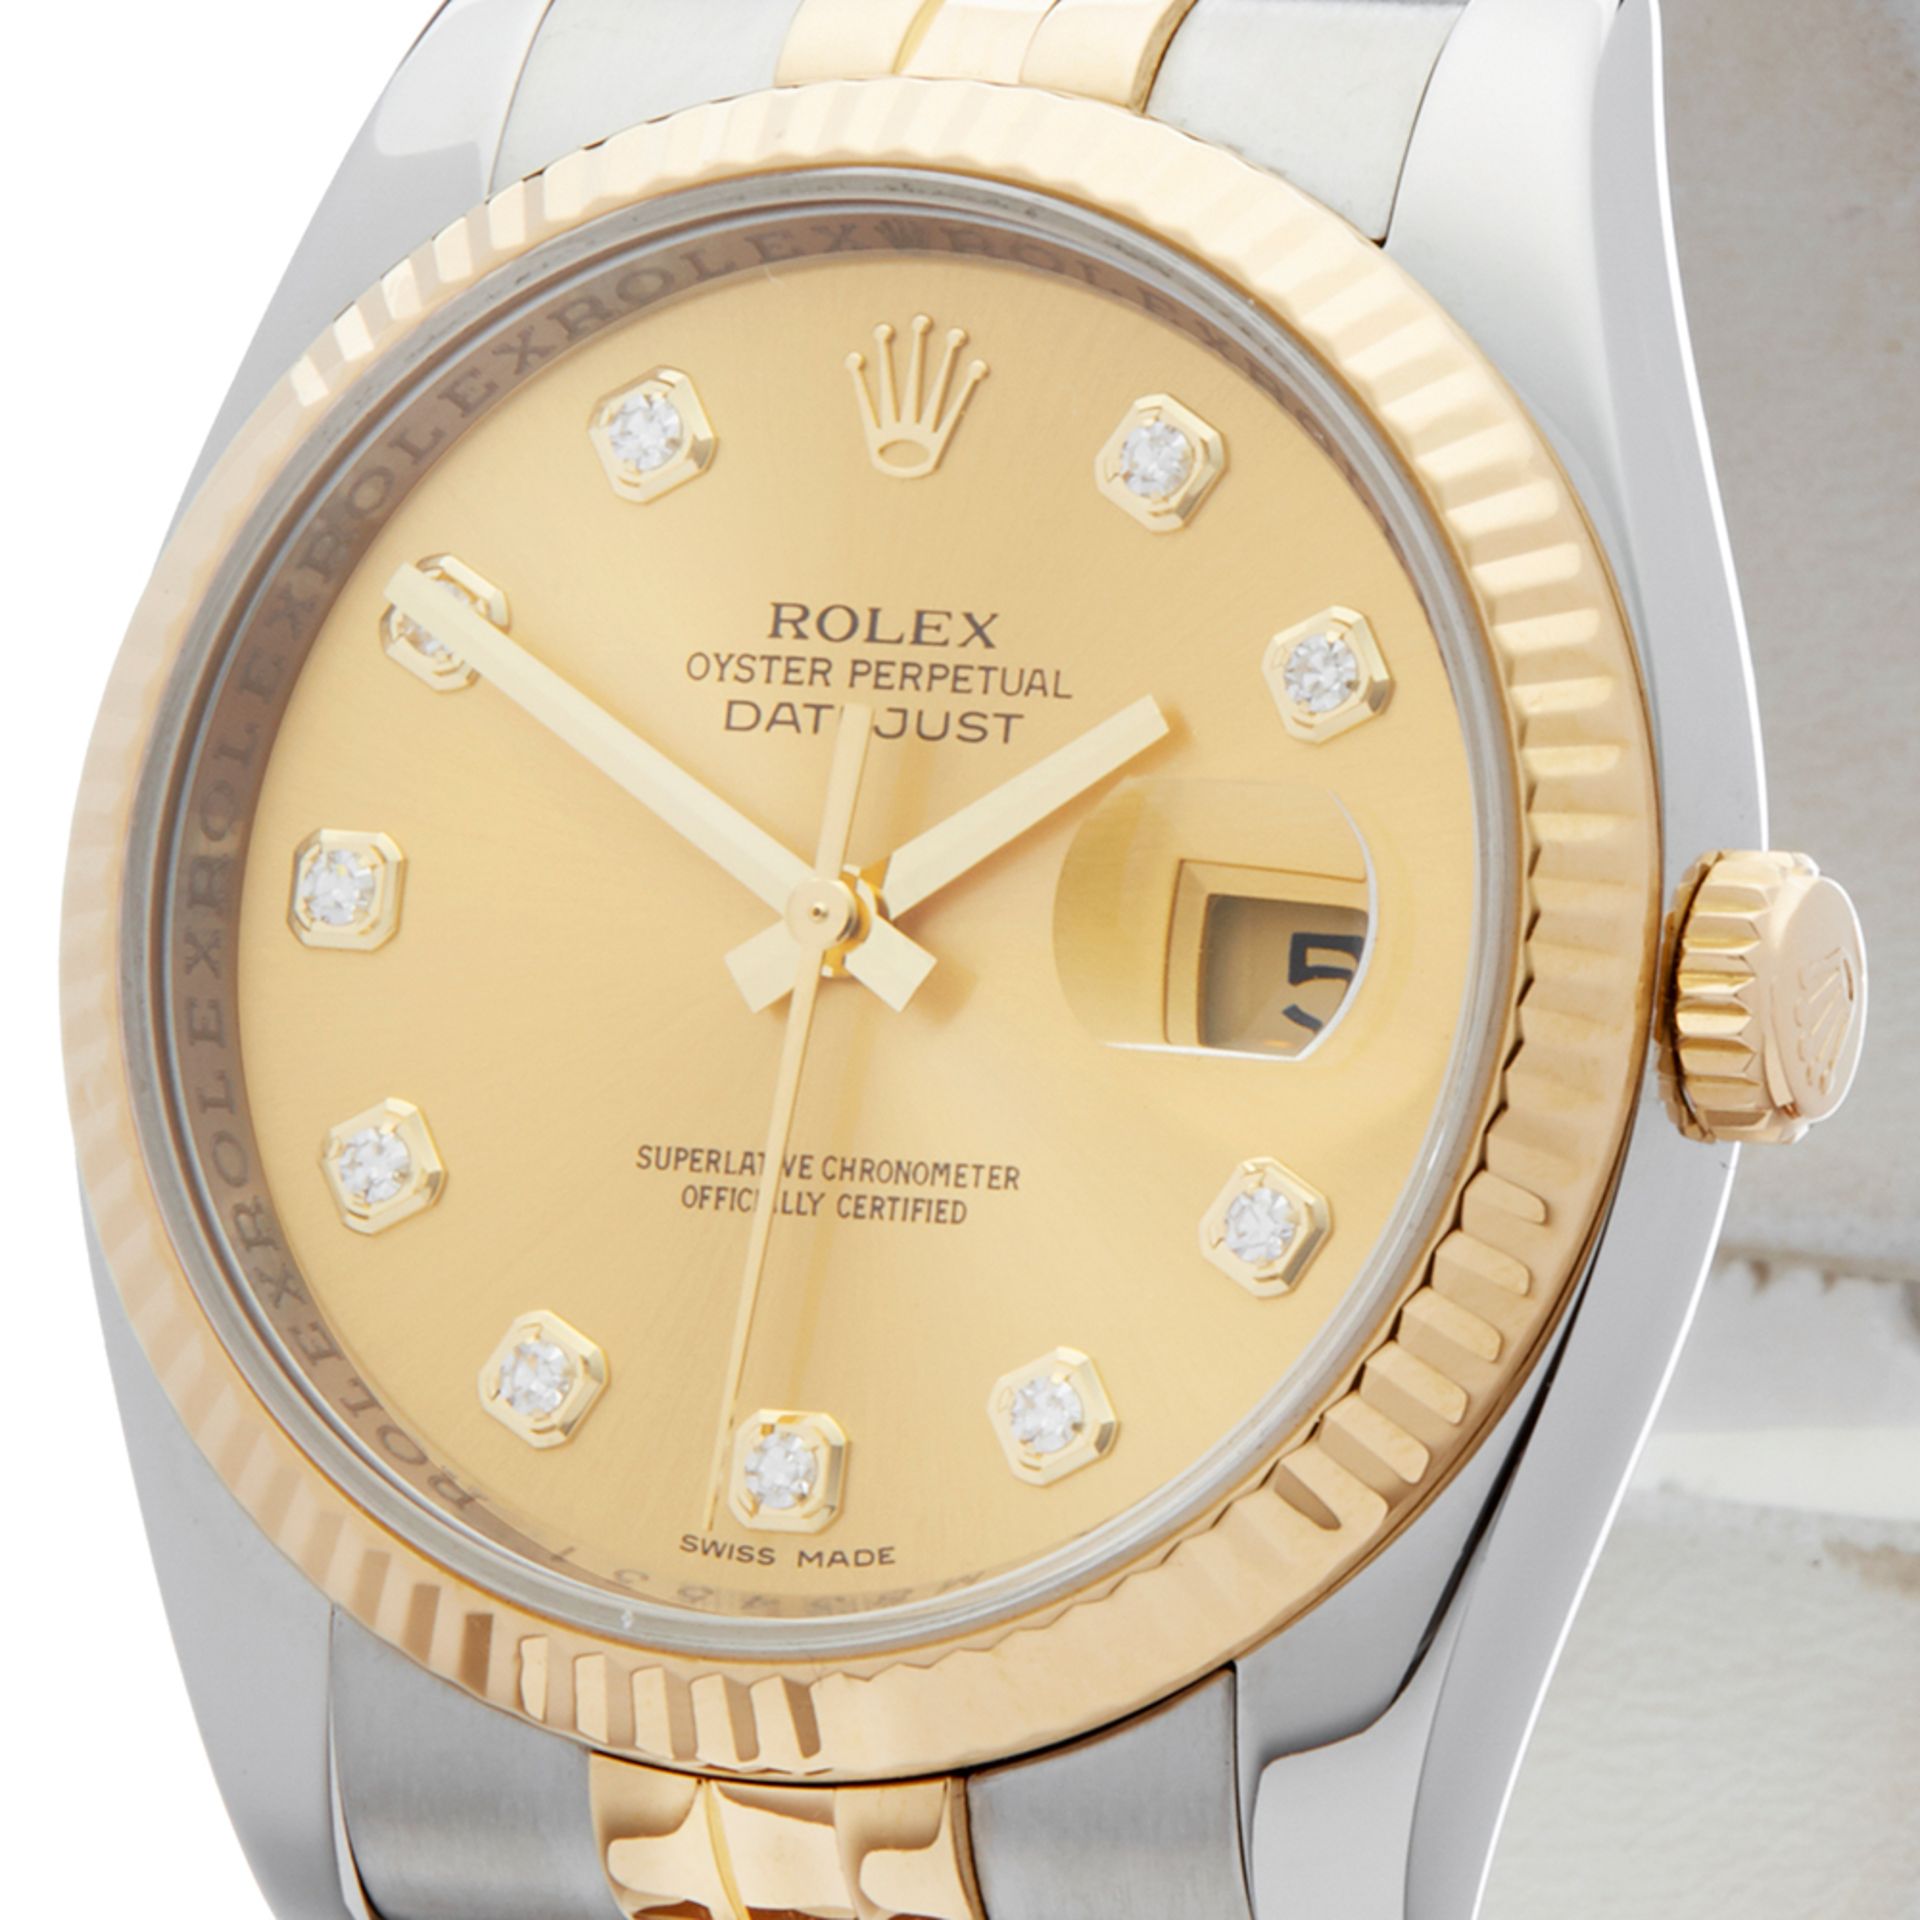 2008 Rolex DateJust 36 Diamond 18k Stainless Steel & Yellow Gold - 116233 - Image 5 of 7